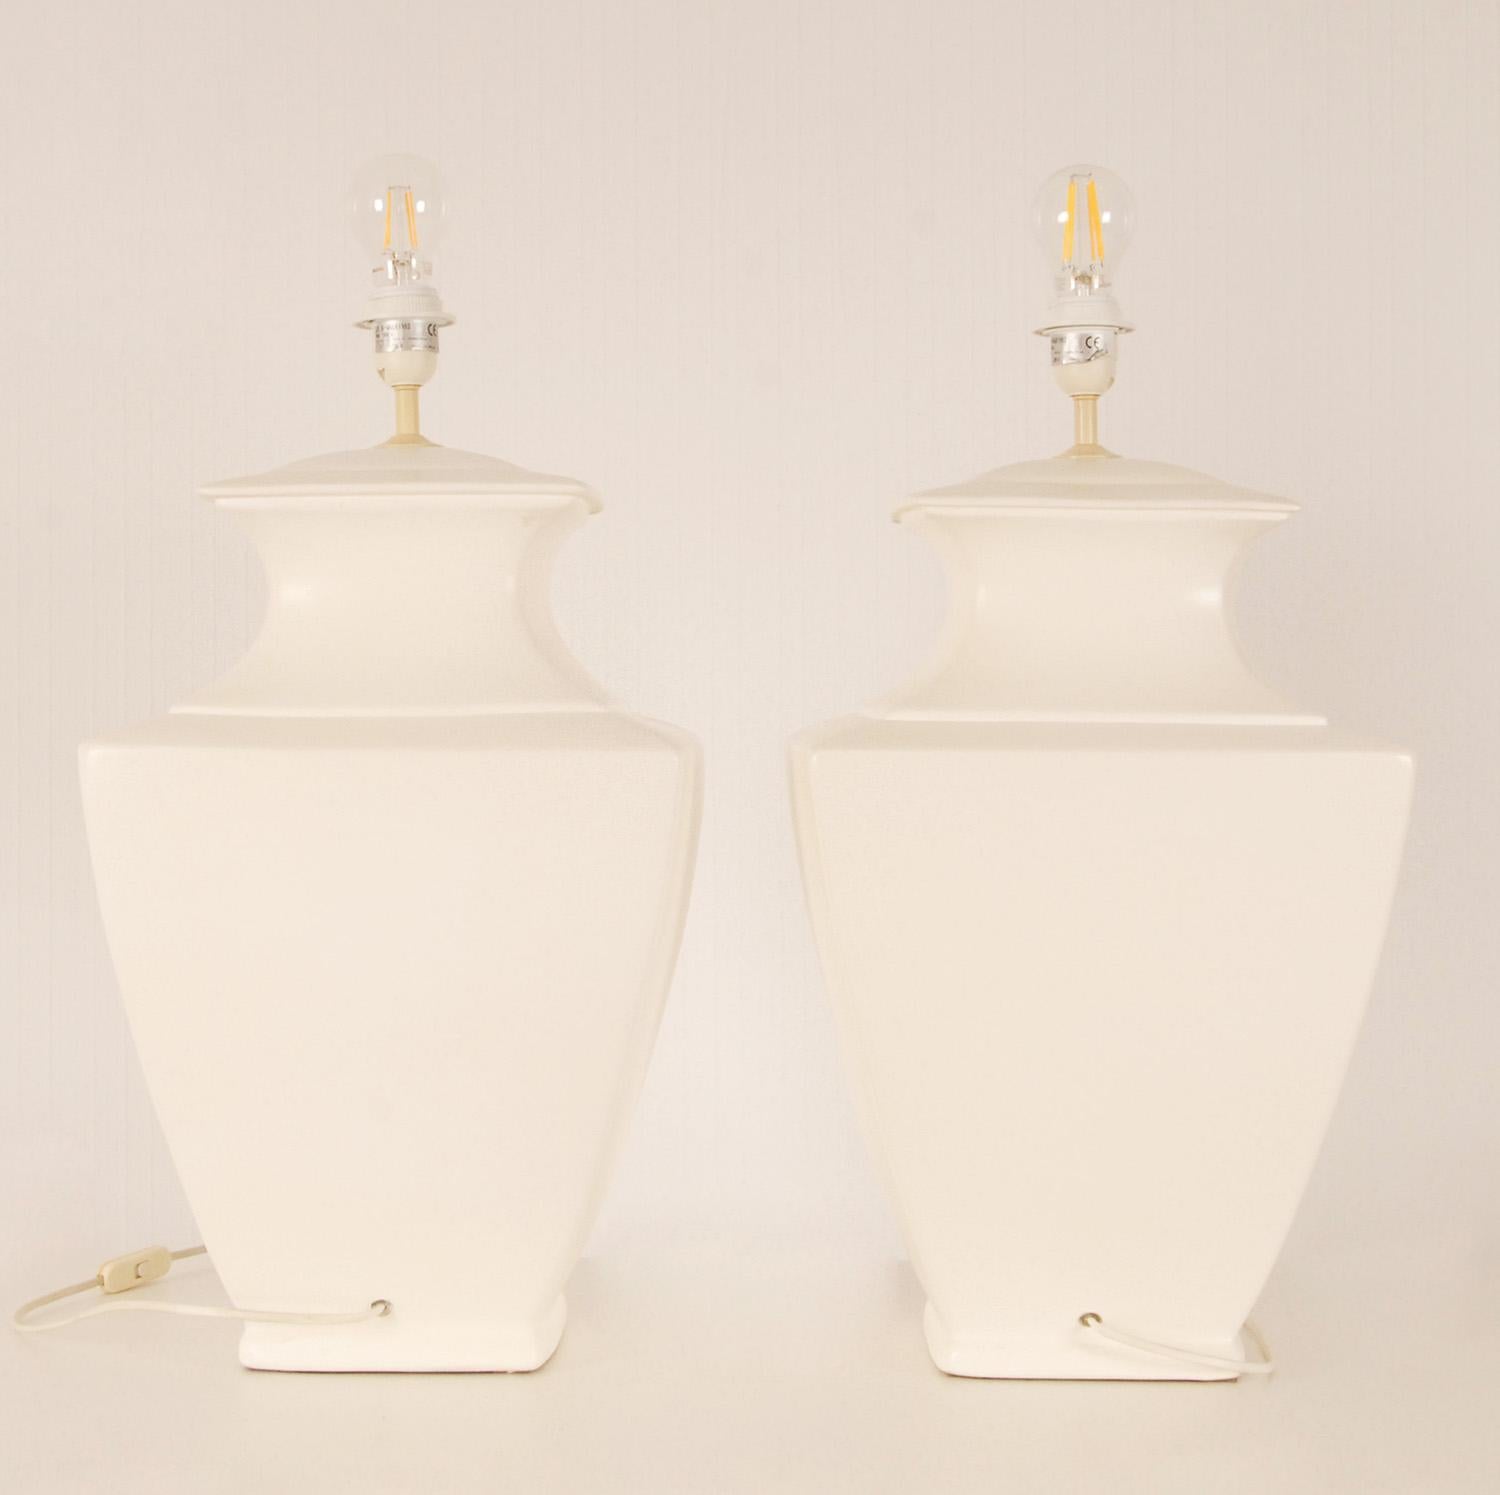 Vintage Ceramic Lamps Tall Modern Square blue White Chinoiserie Table Lamps pair For Sale 3